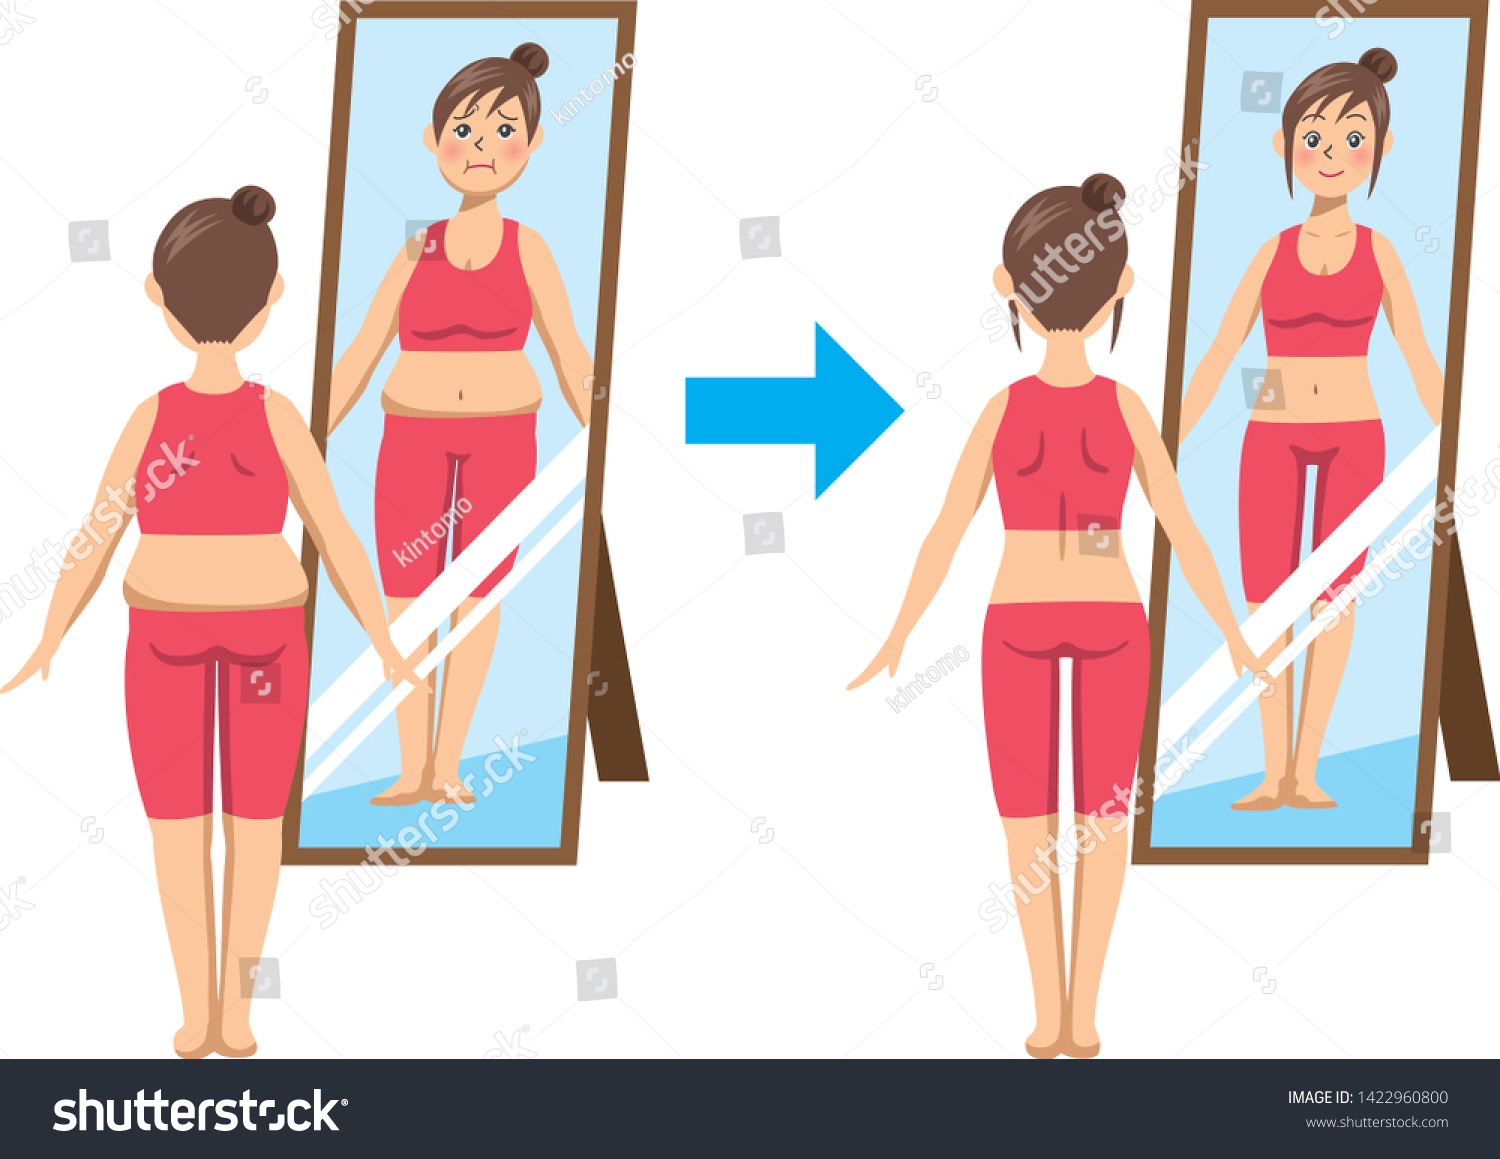 SVG of Image illustration of a young woman who reflects the whole body in a mirror. (Before after) svg